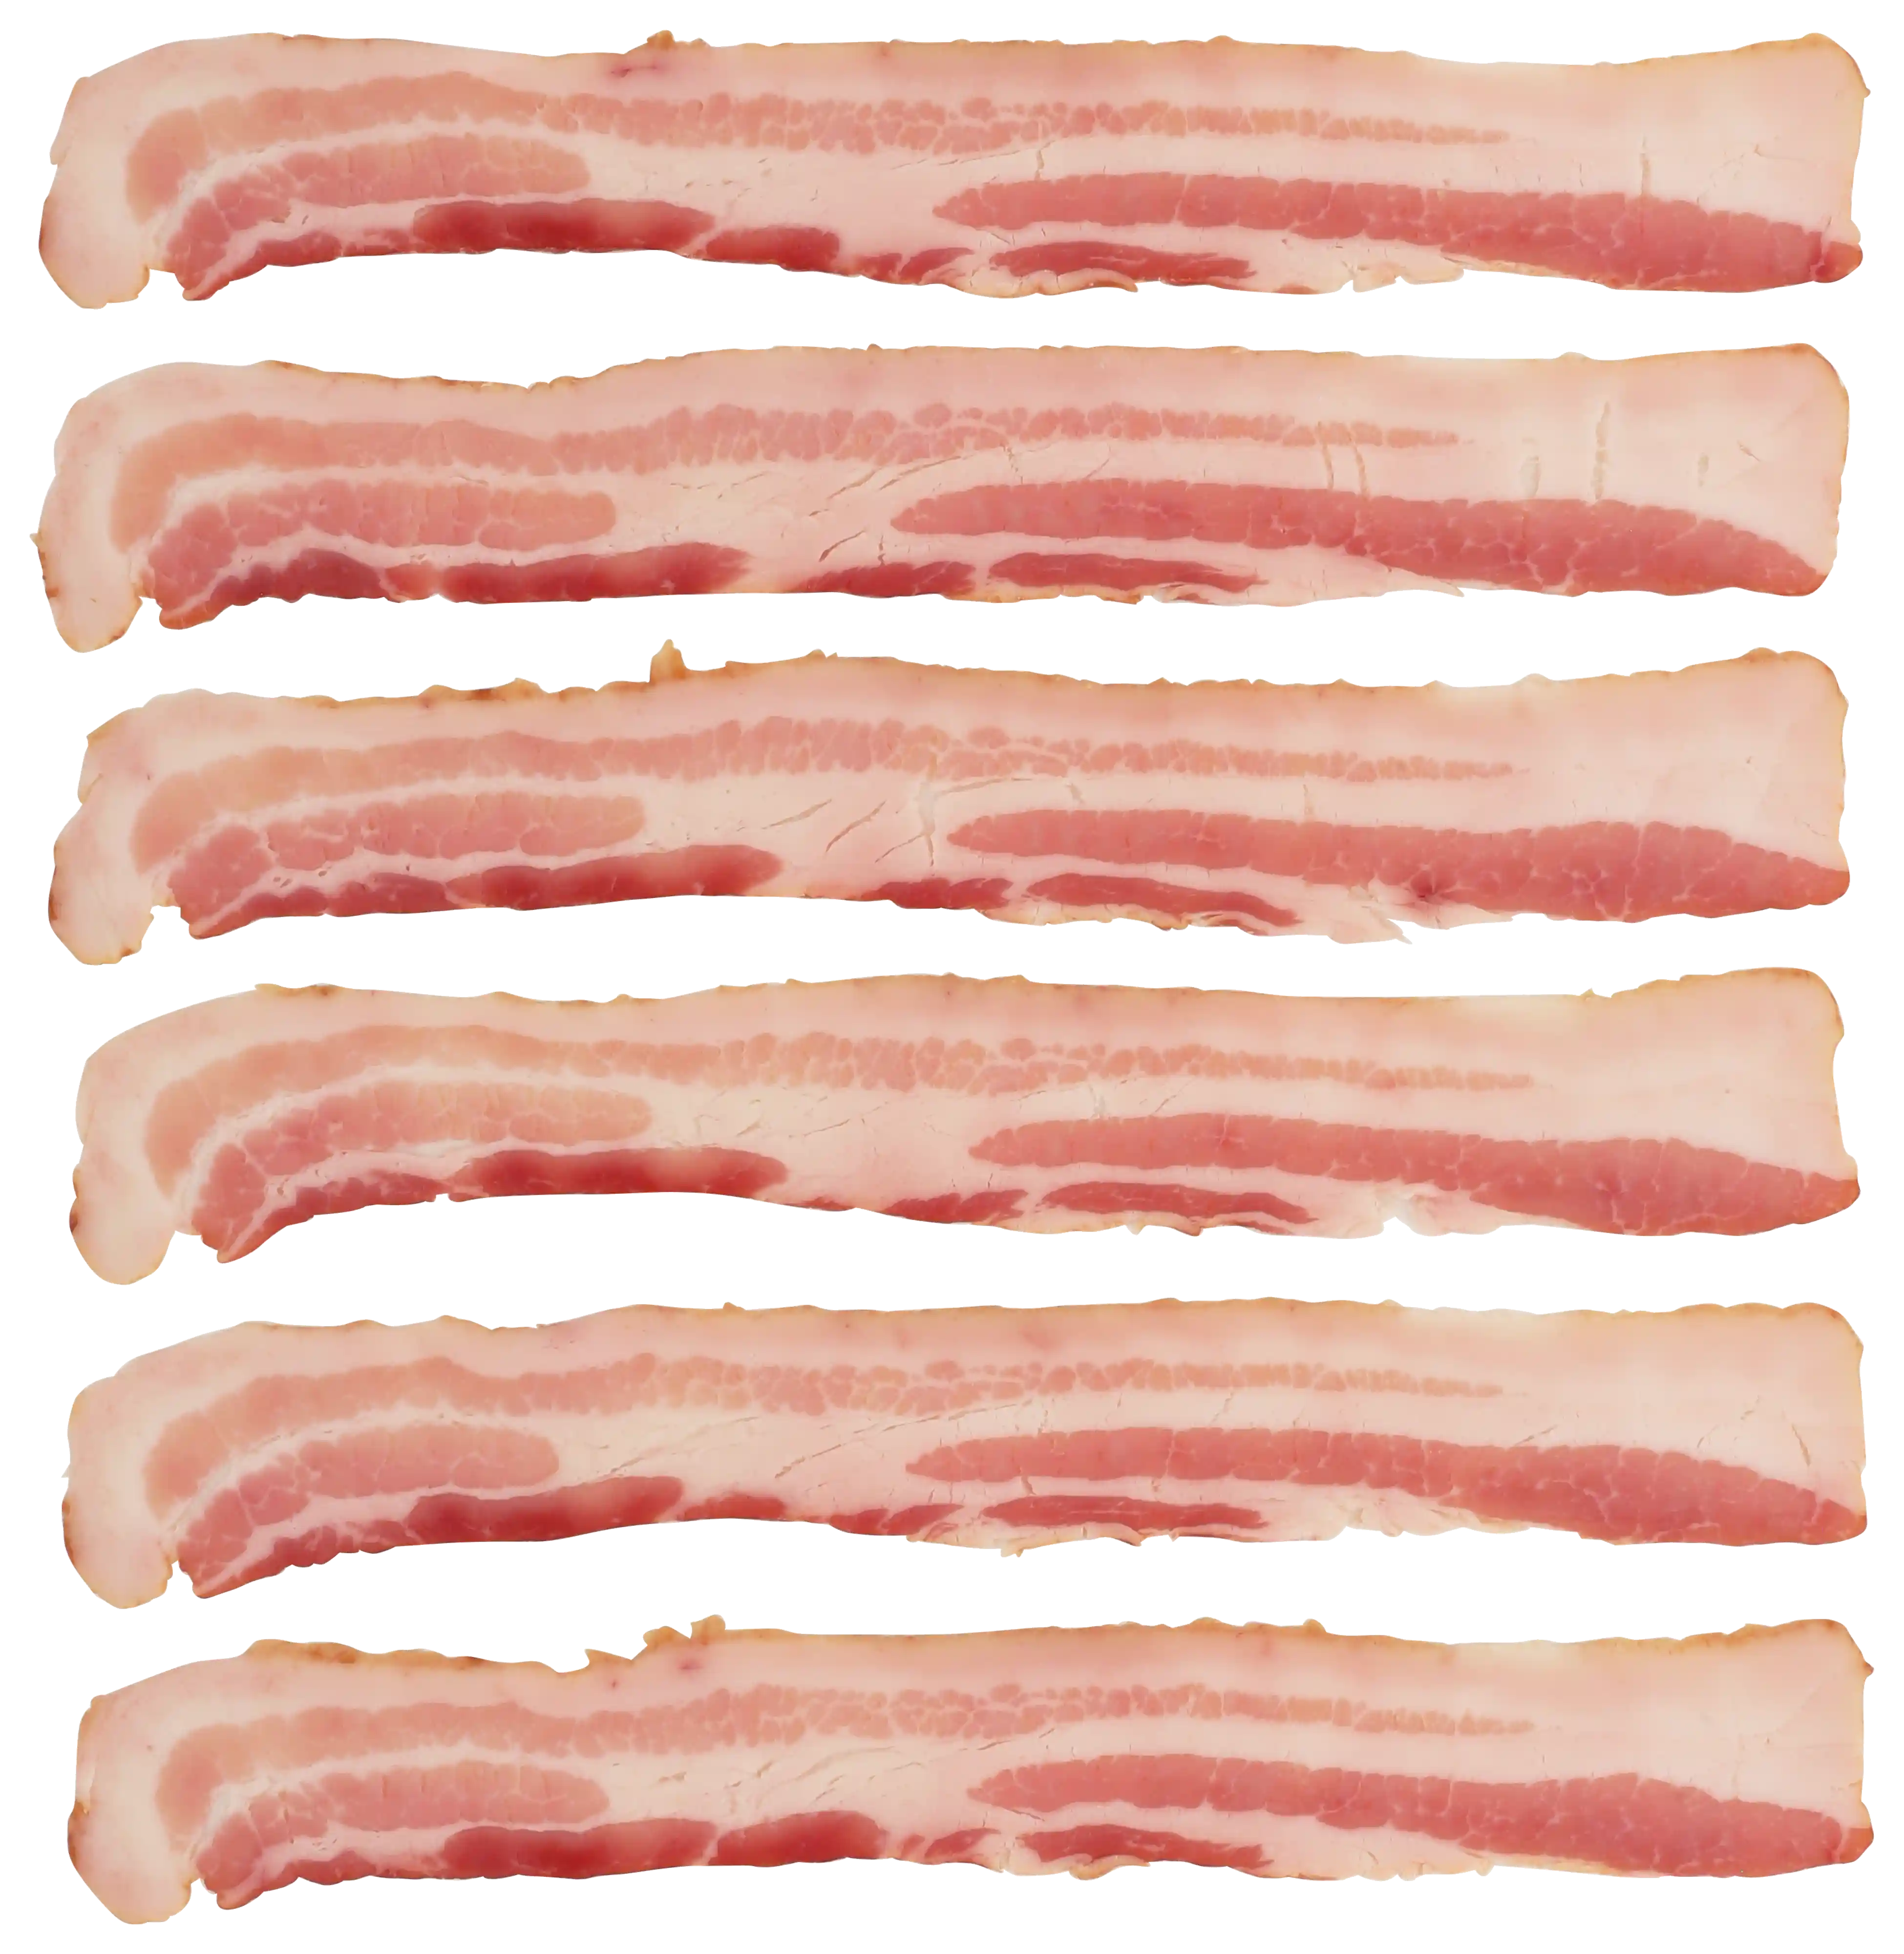 Wright® Brand Naturally Hickory Smoked Regular Sliced Bacon, Bulk, 15 Lbs, 14-18 Slices per Pound, Gas Flushed_image_11